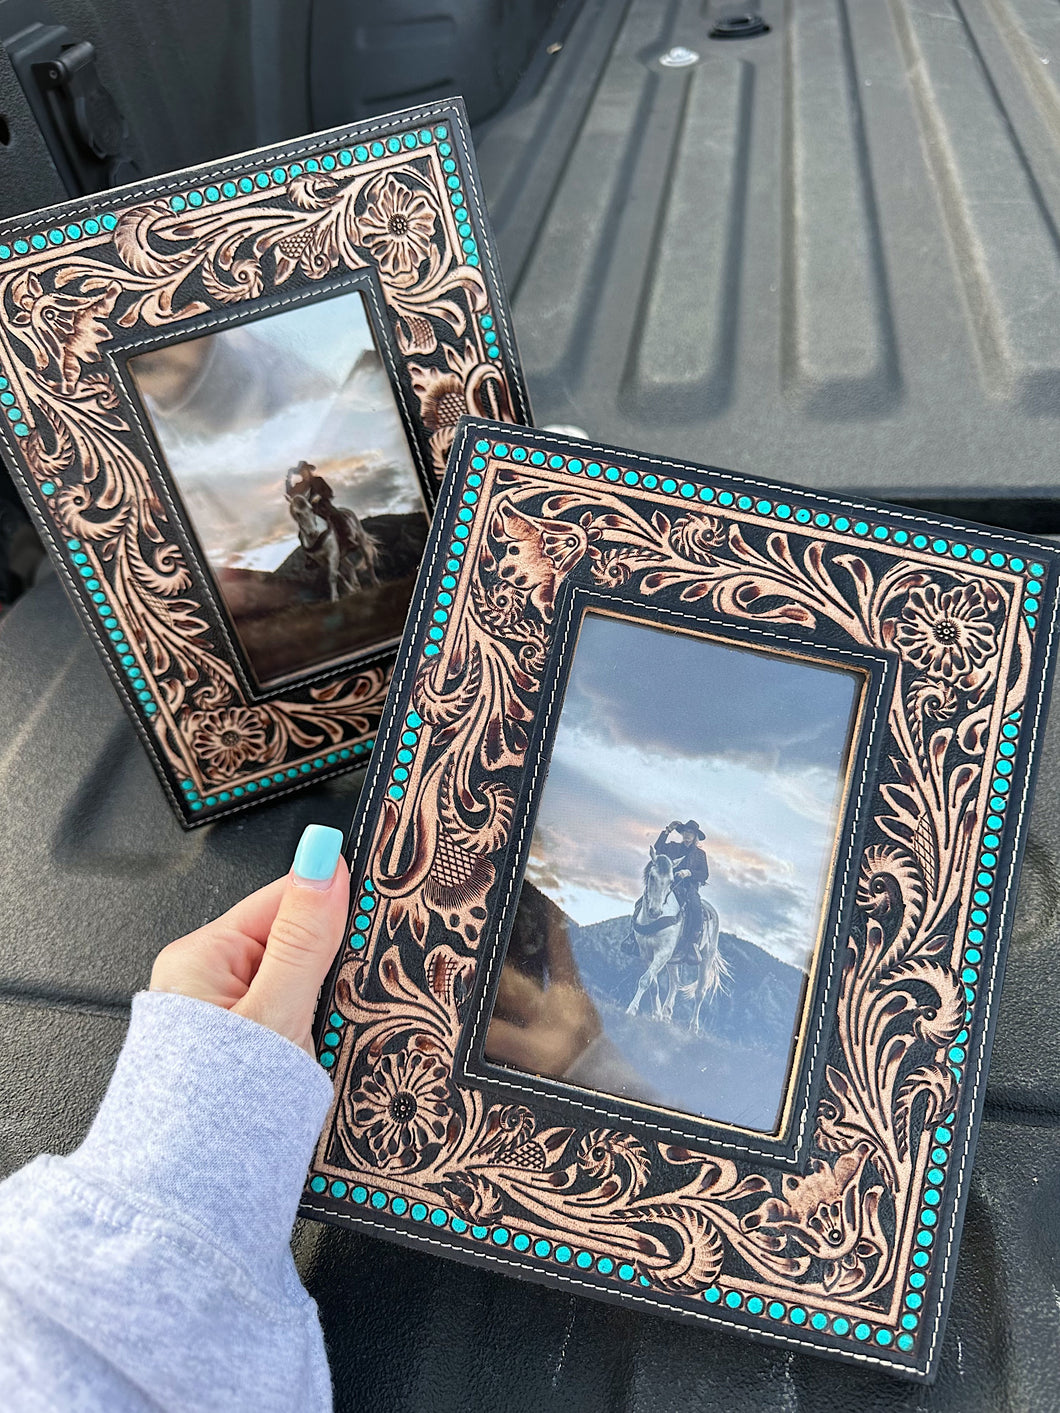 Turquoise Tooled Leather Picture Frame